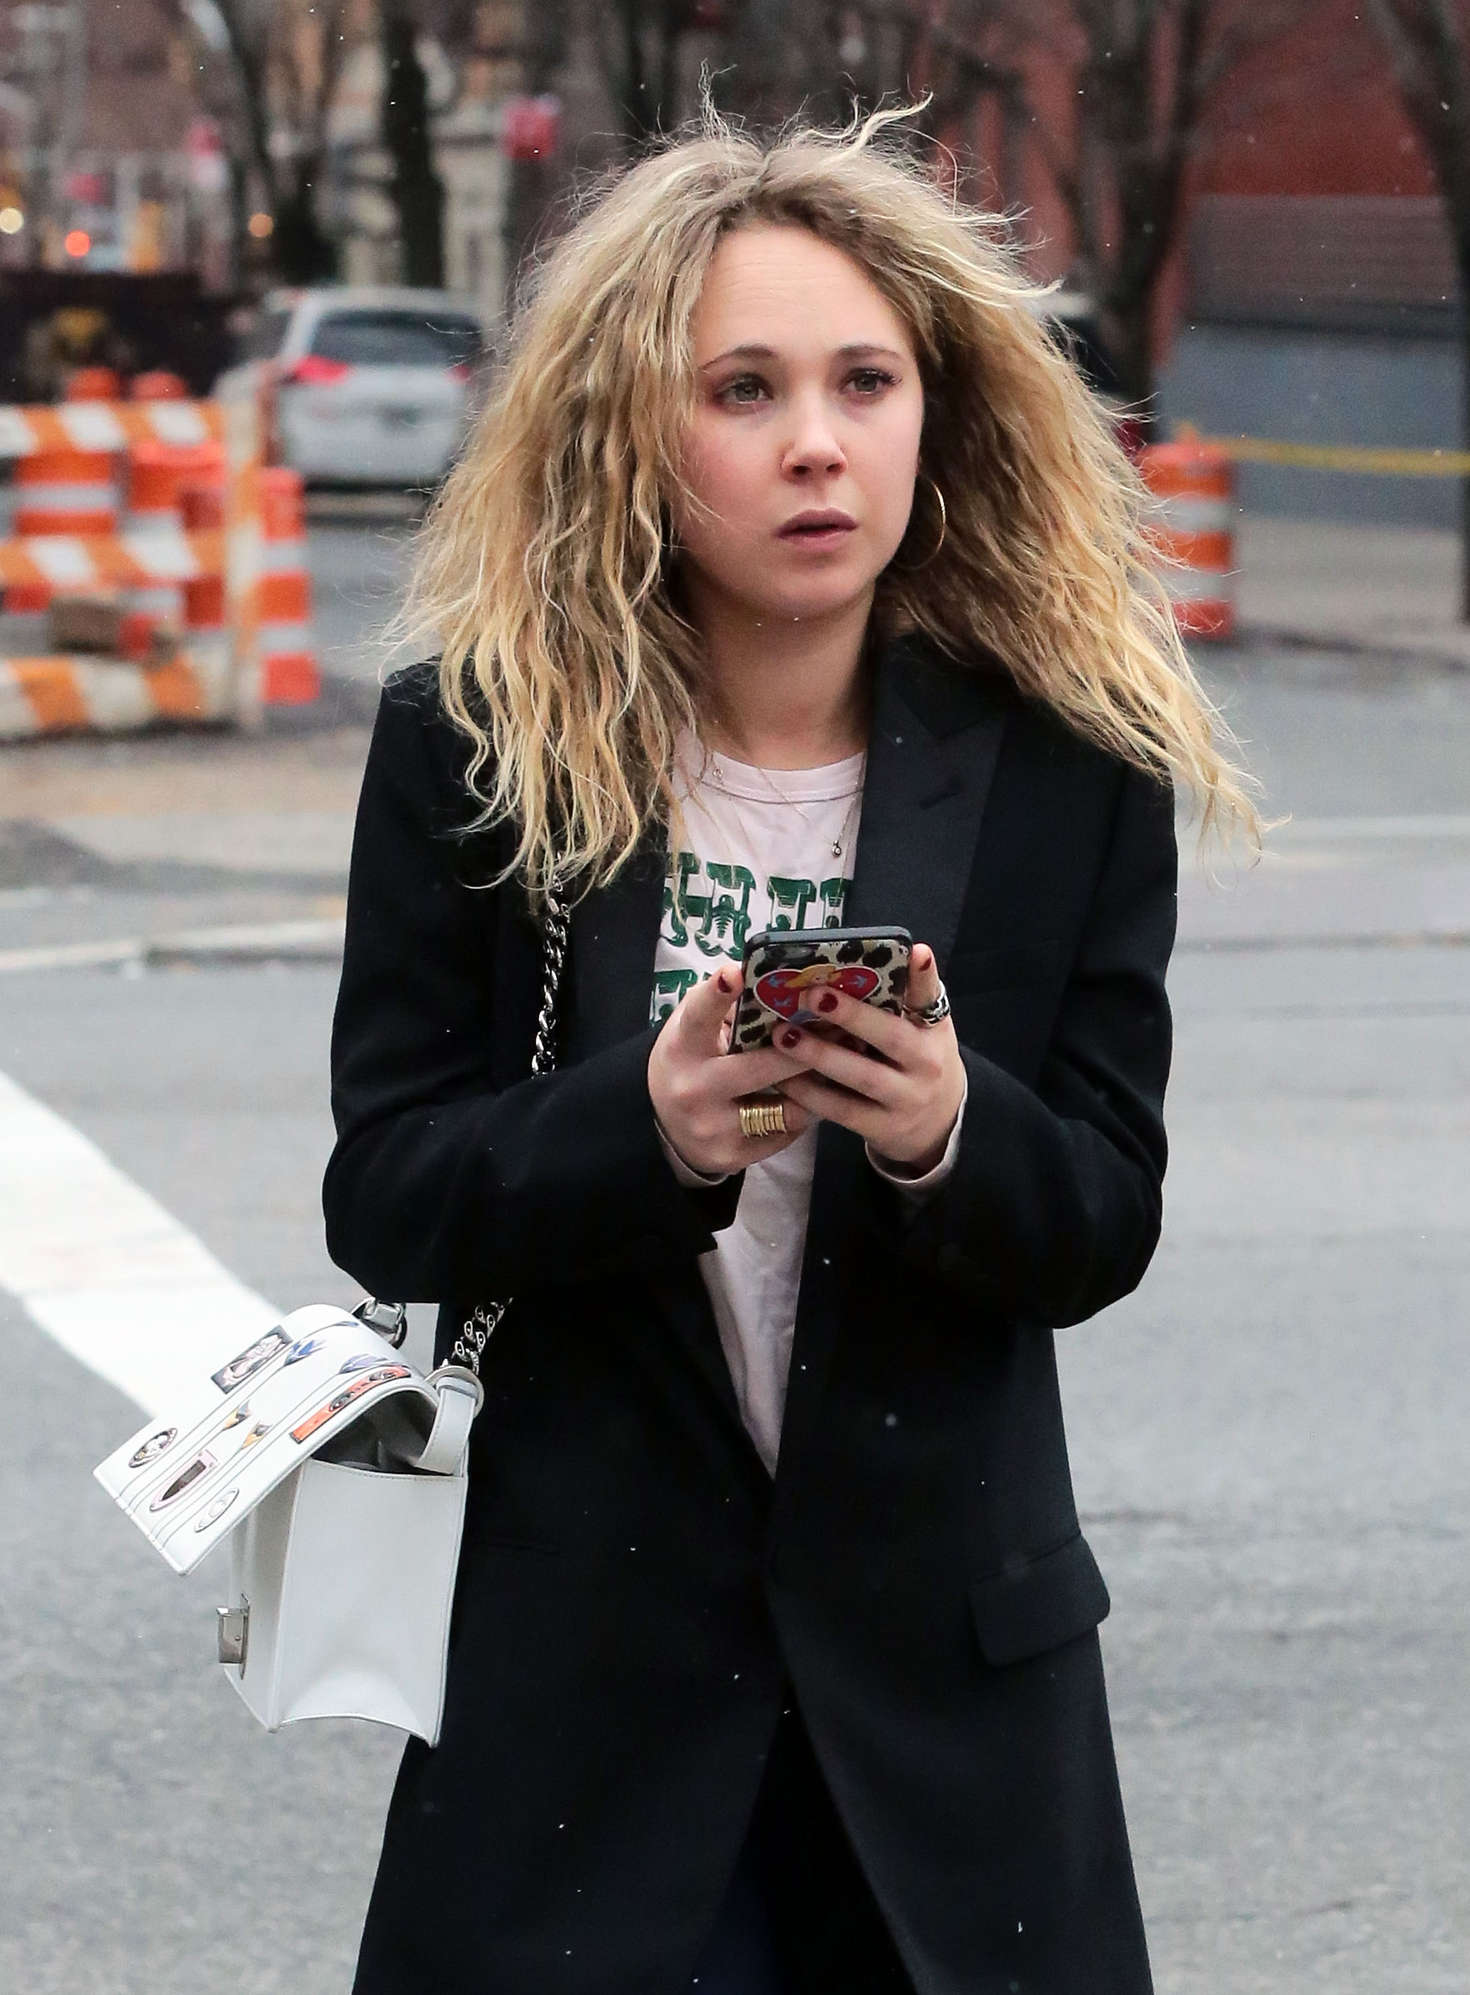 Juno Temple out in NYC.